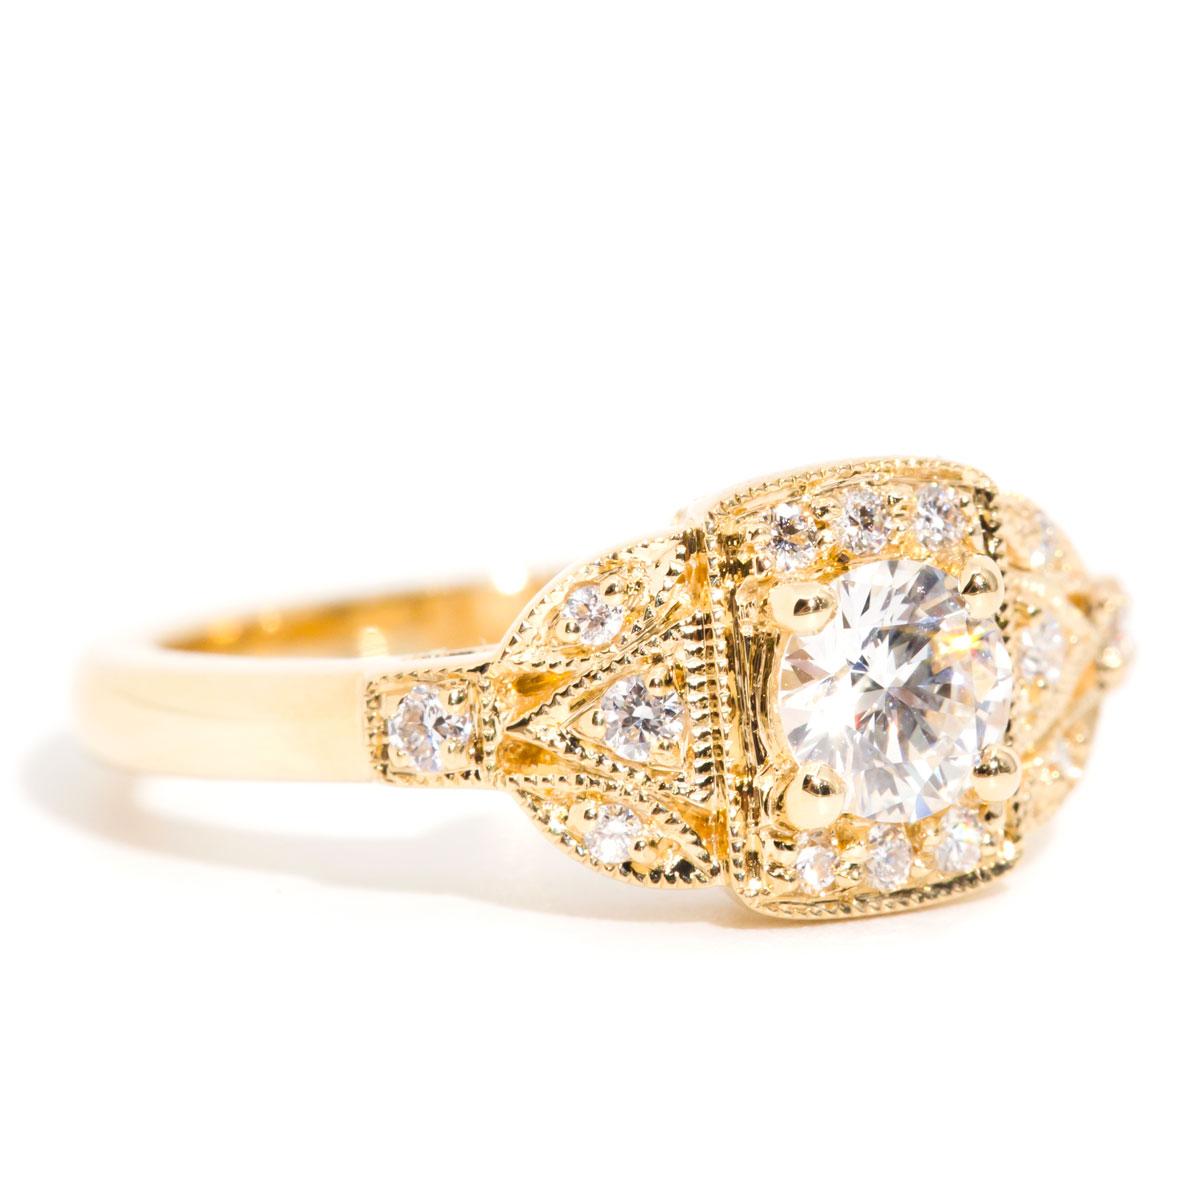 Carefully crafted in 18 carat yellow gold is this gorgeous vintage-inspired diamond cluster ring featuring a stunning 0.43 carat round brilliant cut diamond embellished with a plethora of sparkling round brilliant cut diamonds. We have name this